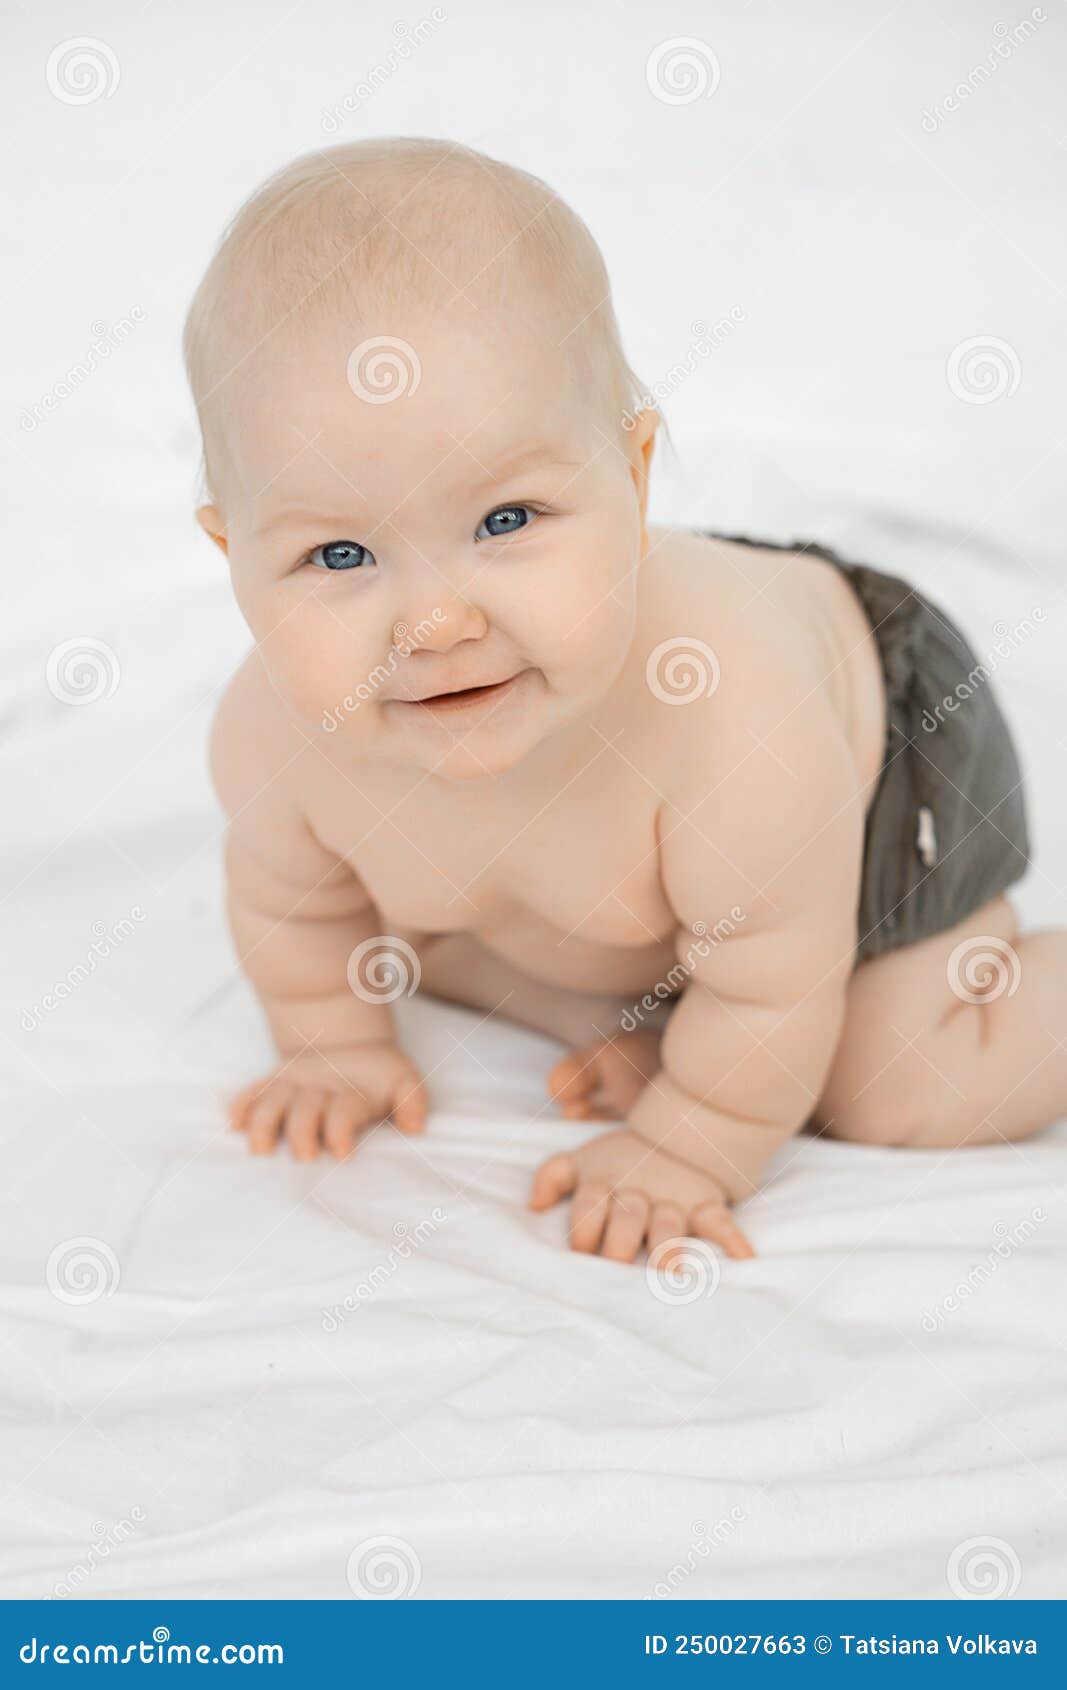 portrait of beautiful smiling grey-eyed plump cherubic baby infant toddler wearing grey pants standing on all fours.